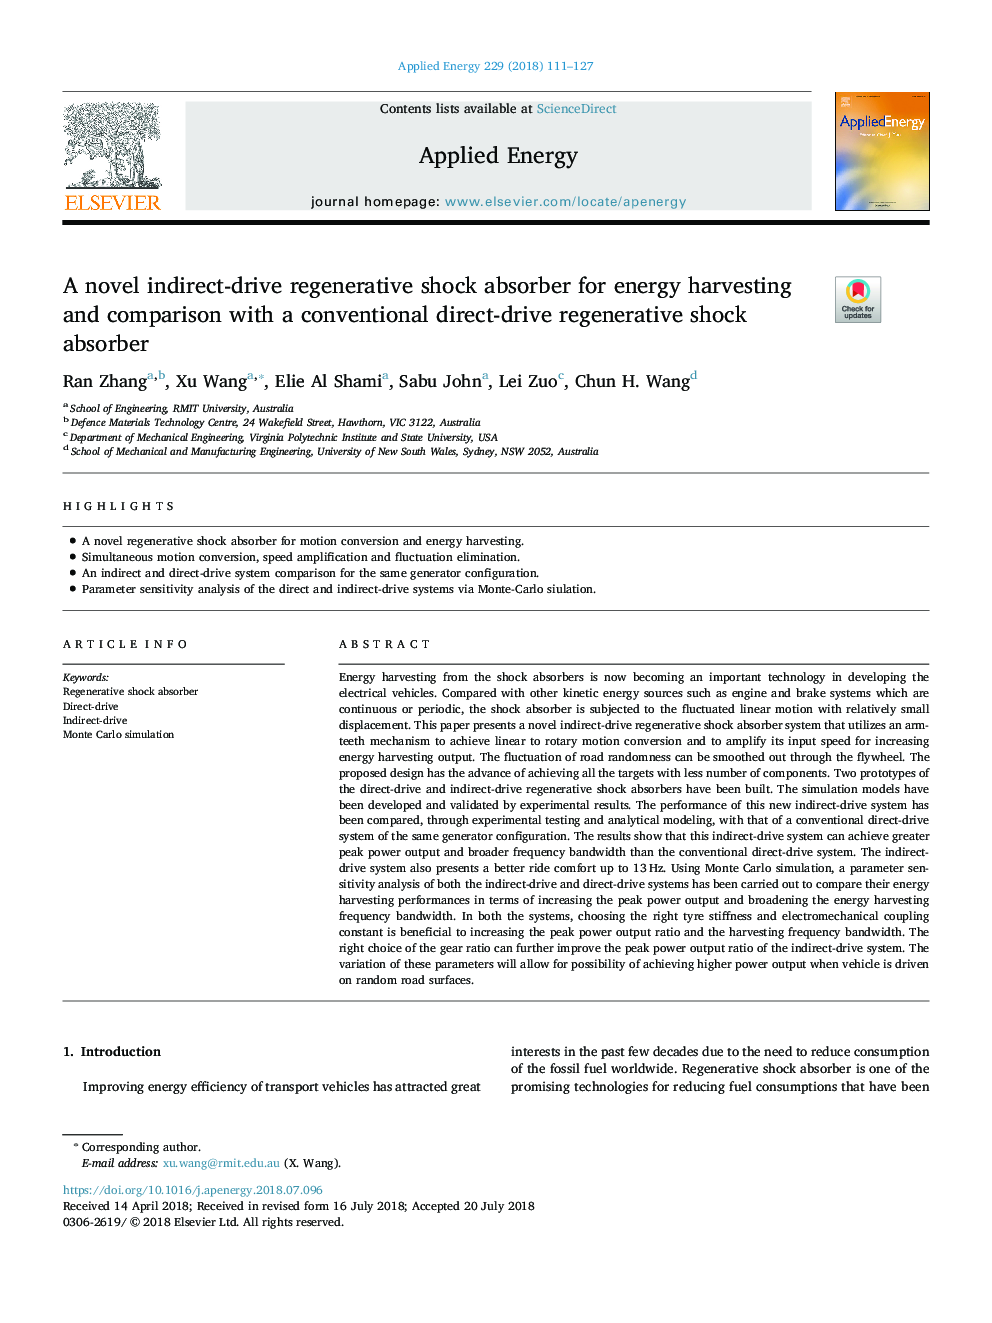 A novel indirect-drive regenerative shock absorber for energy harvesting and comparison with a conventional direct-drive regenerative shock absorber